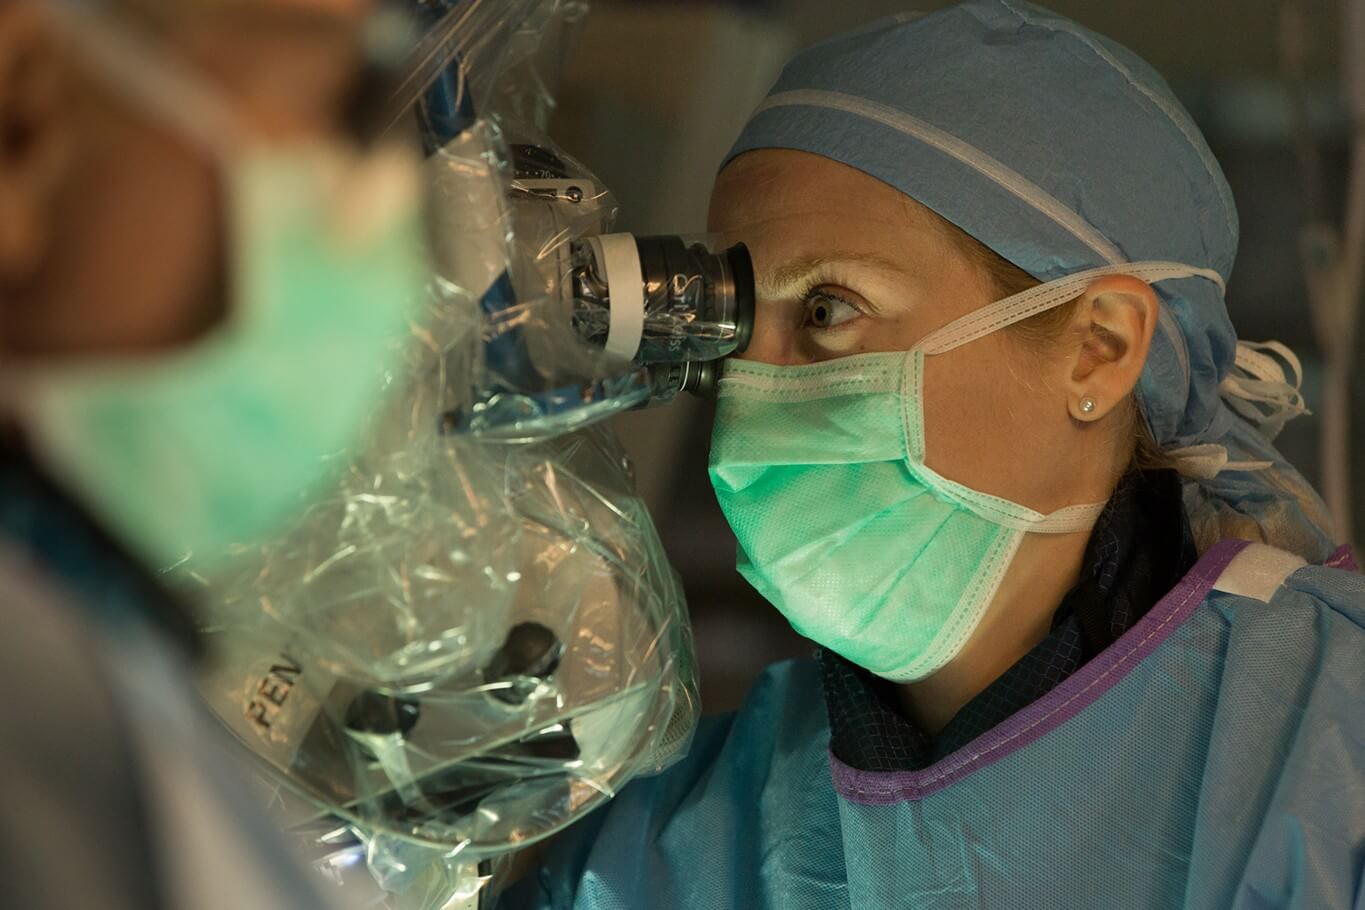 Dr. Laura Snyder on the operating room